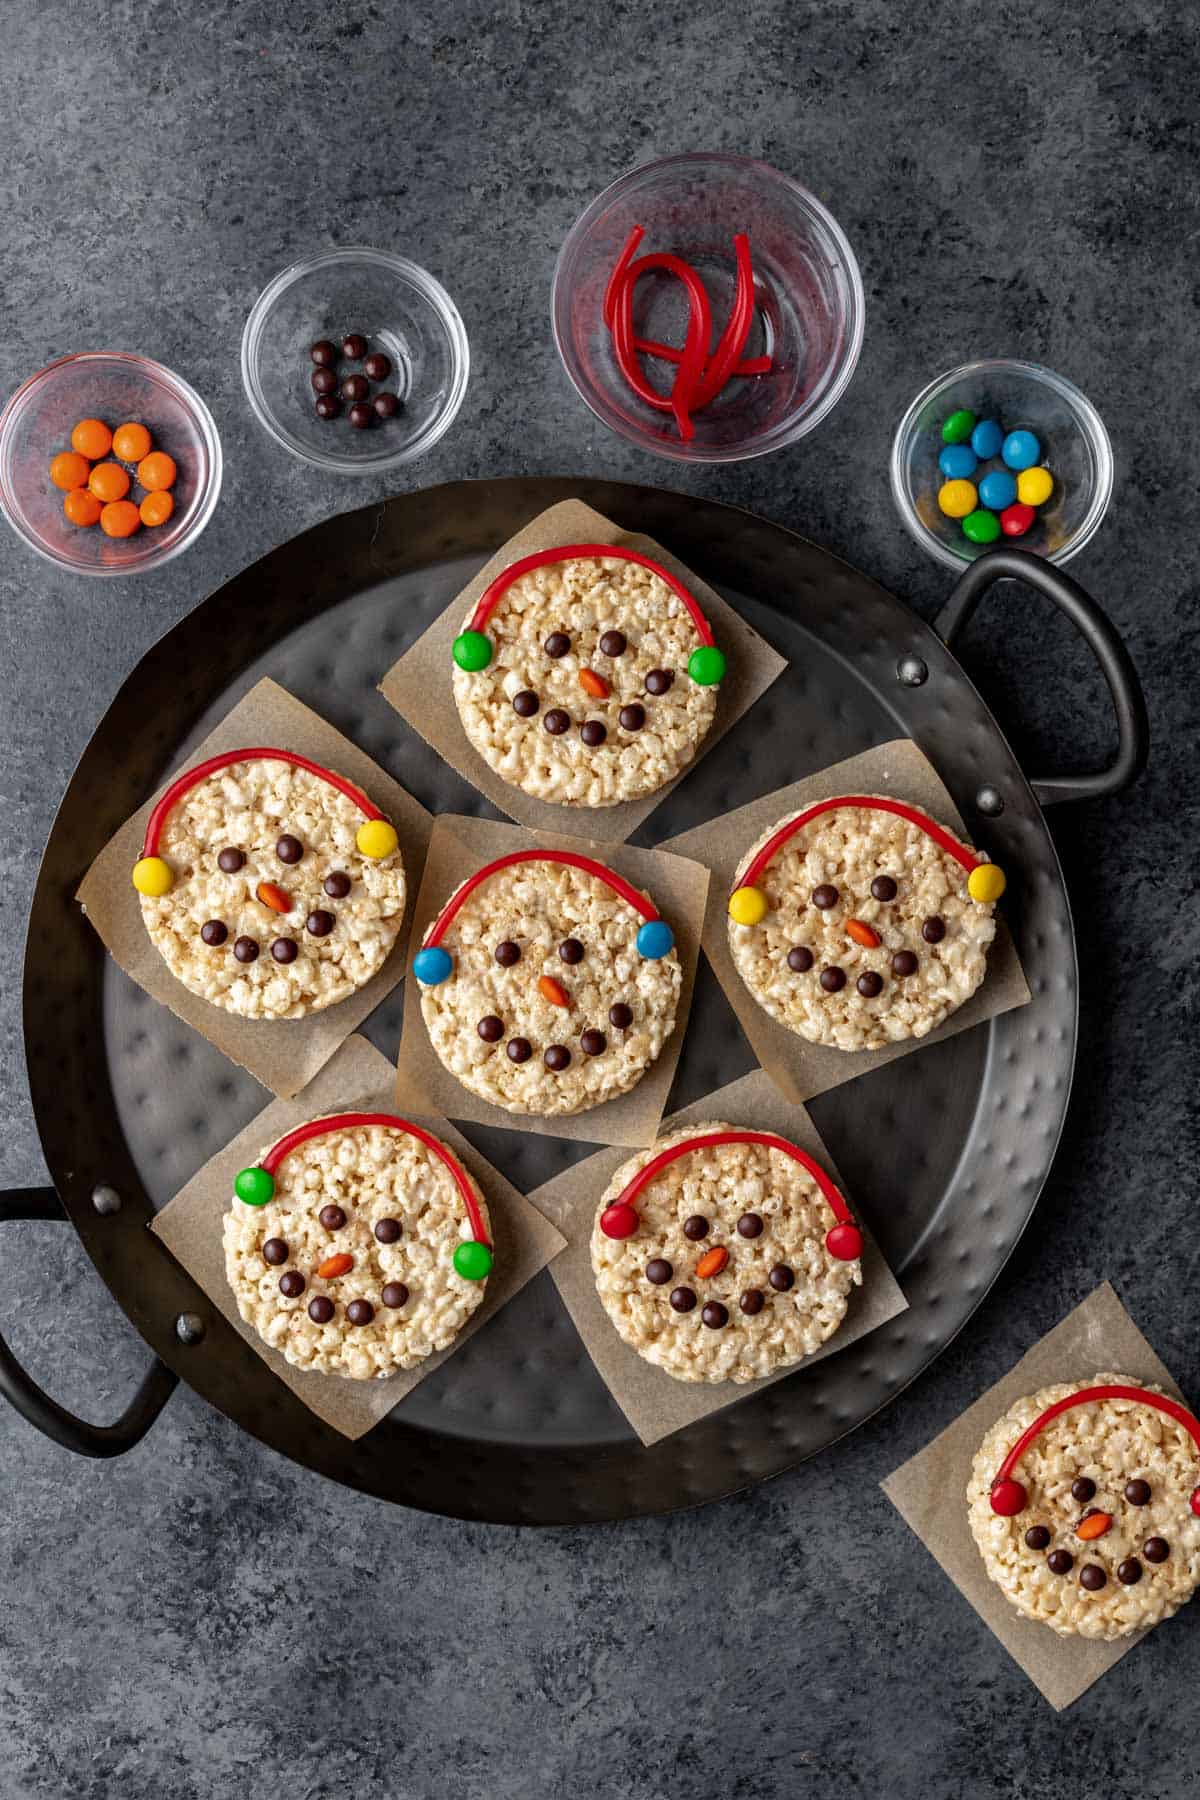 Snowman rice krispie treats with colorful candy earmuffs.